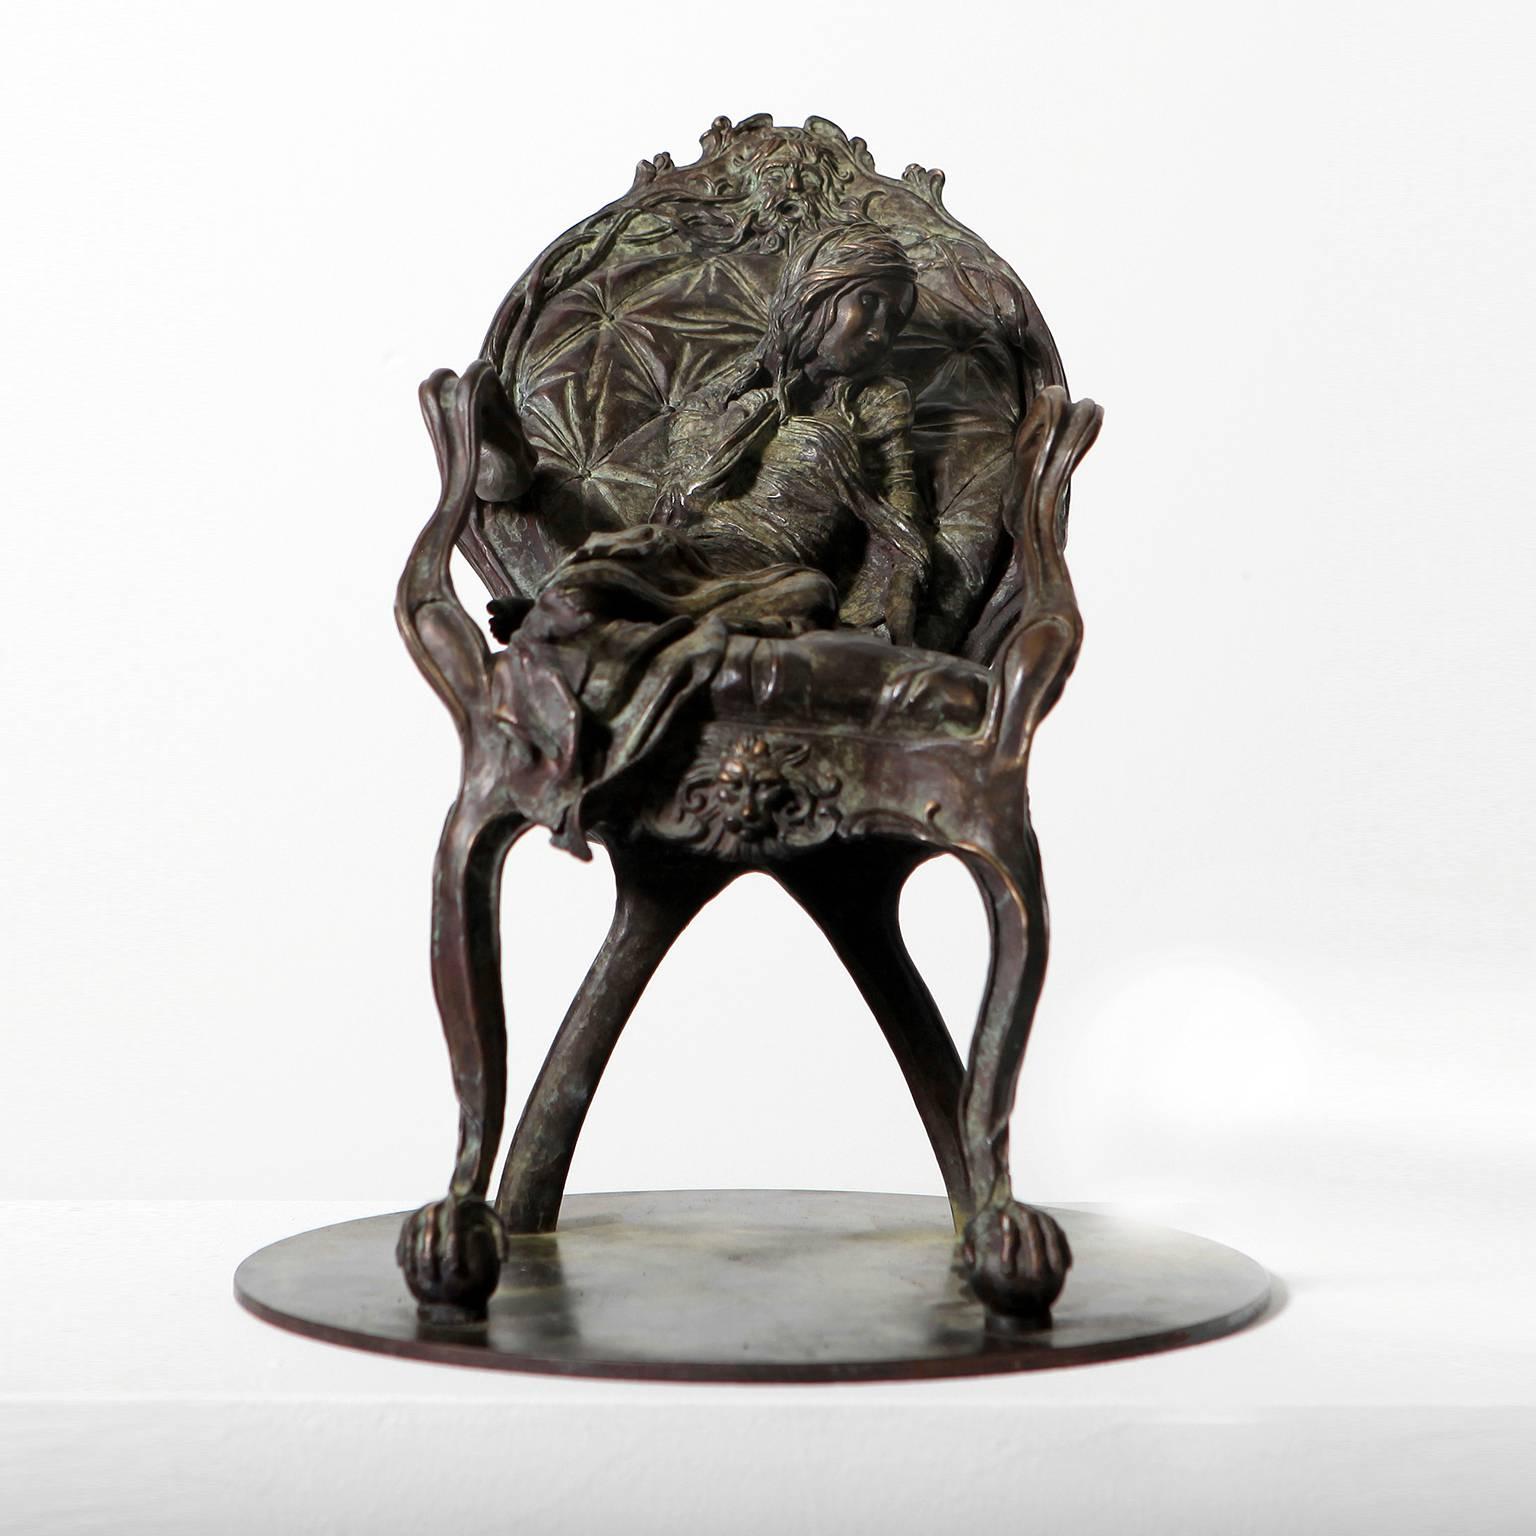 The Chair - Gold Figurative Sculpture by Hobbes Vincent